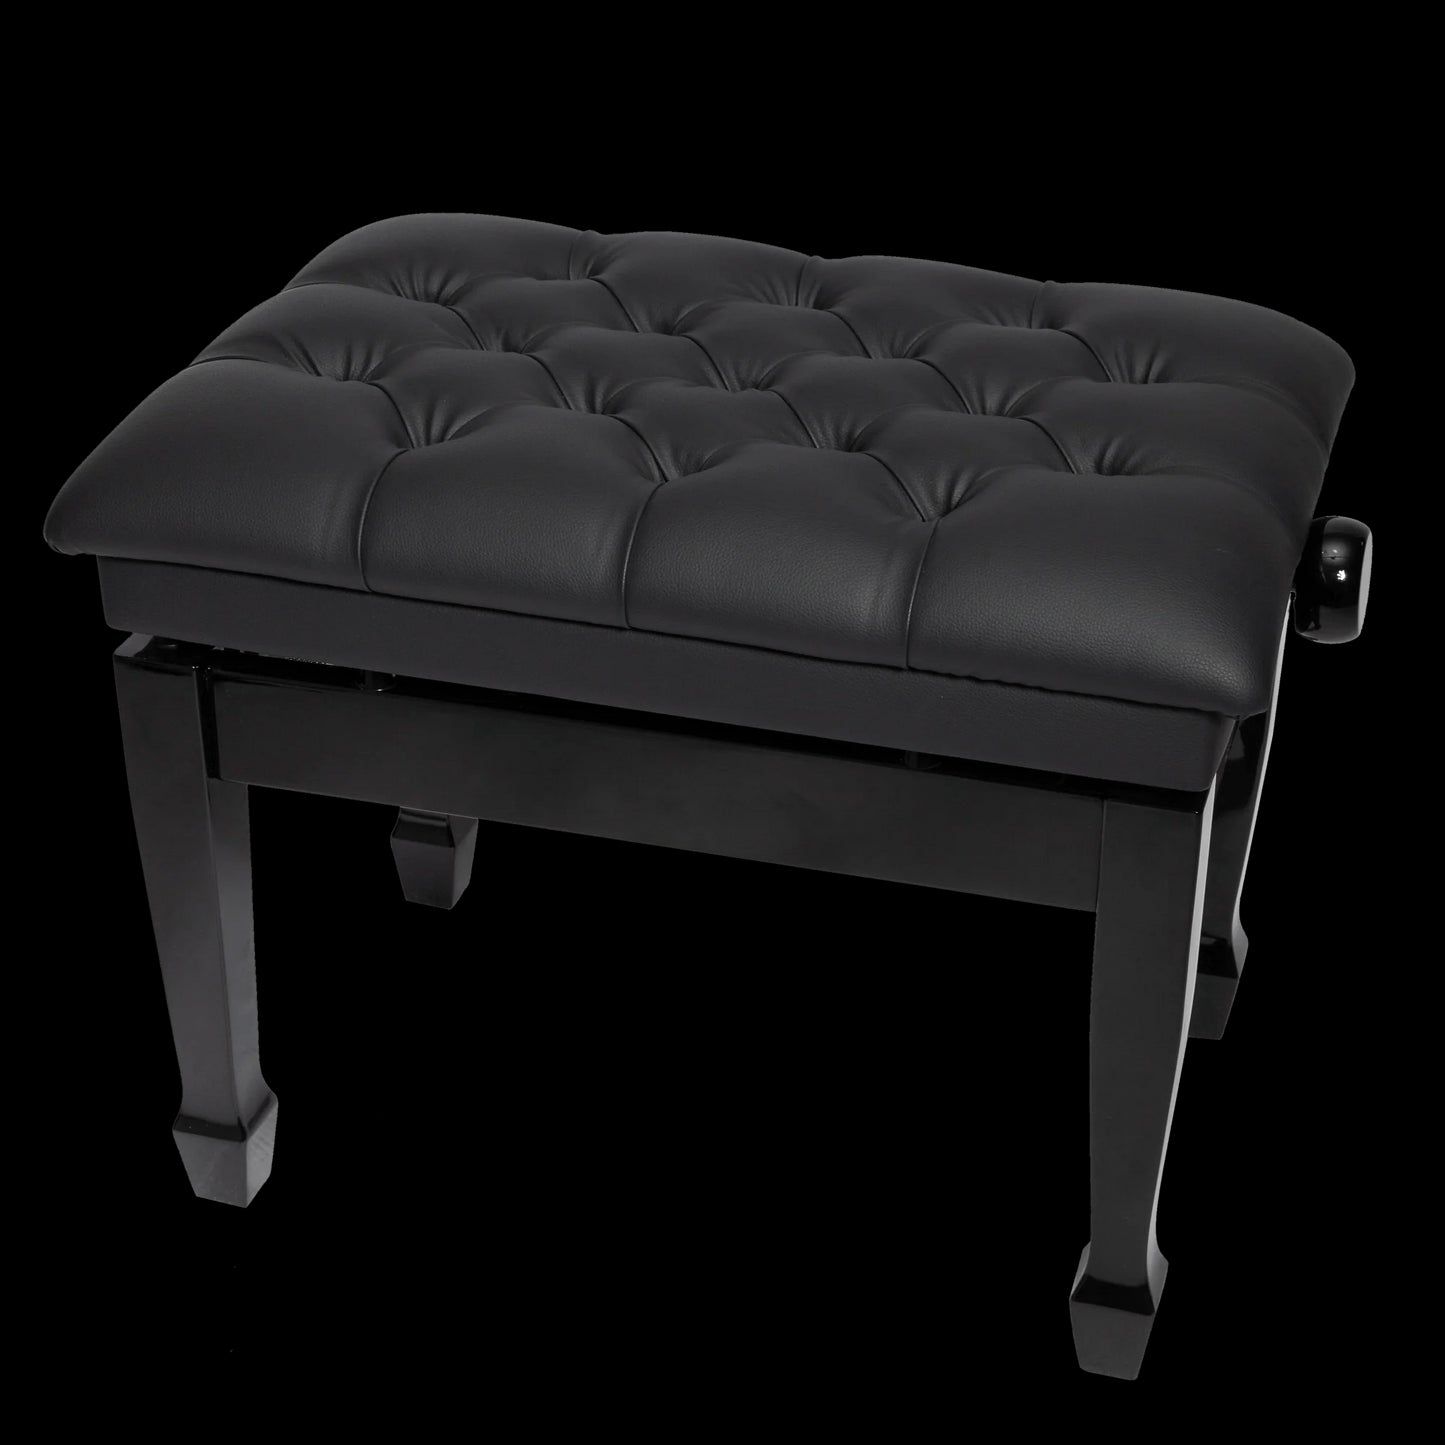 CROWN HYDRAULIC PIANO BENCH - BLACK - Joondalup Music Centre